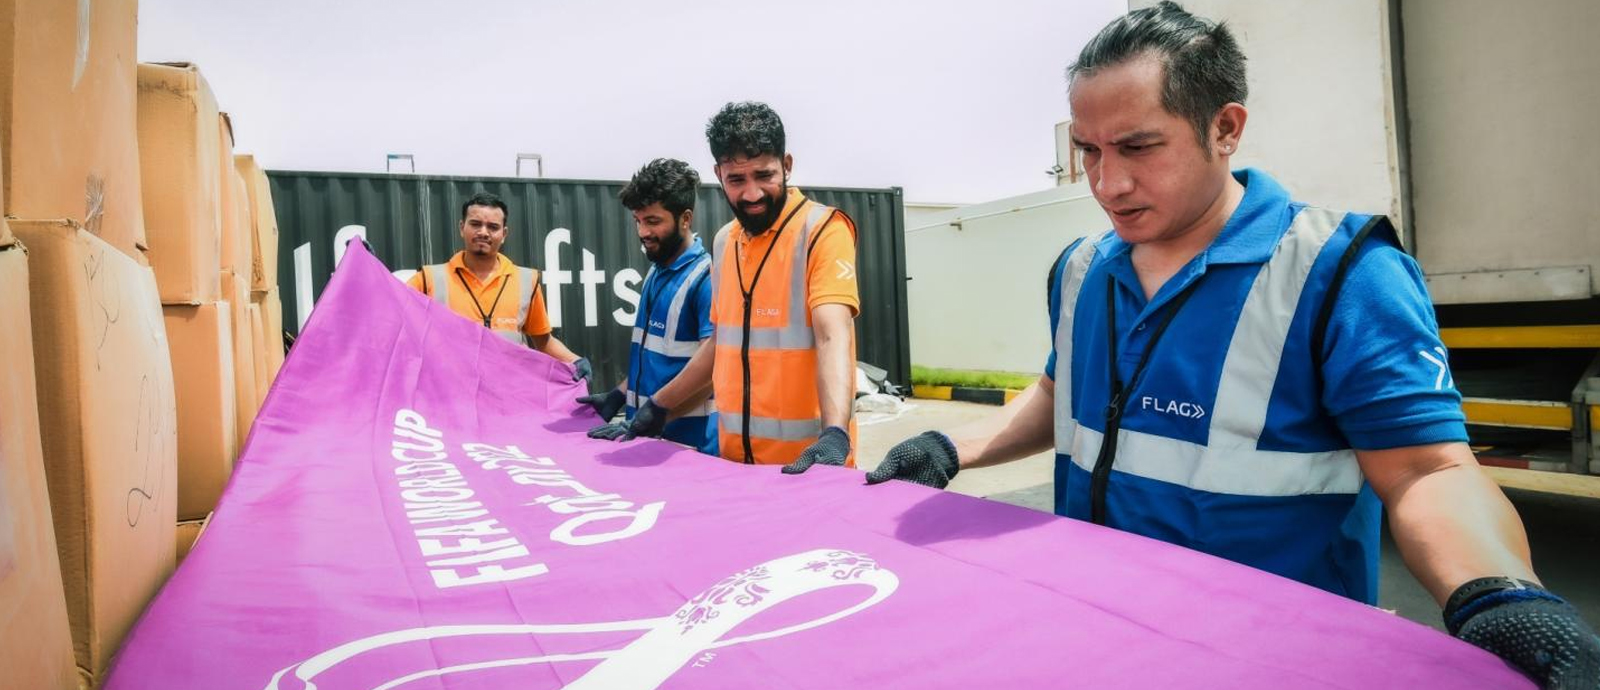 Qatar 2022 World Cup Branding Transformed into New Plastic Products